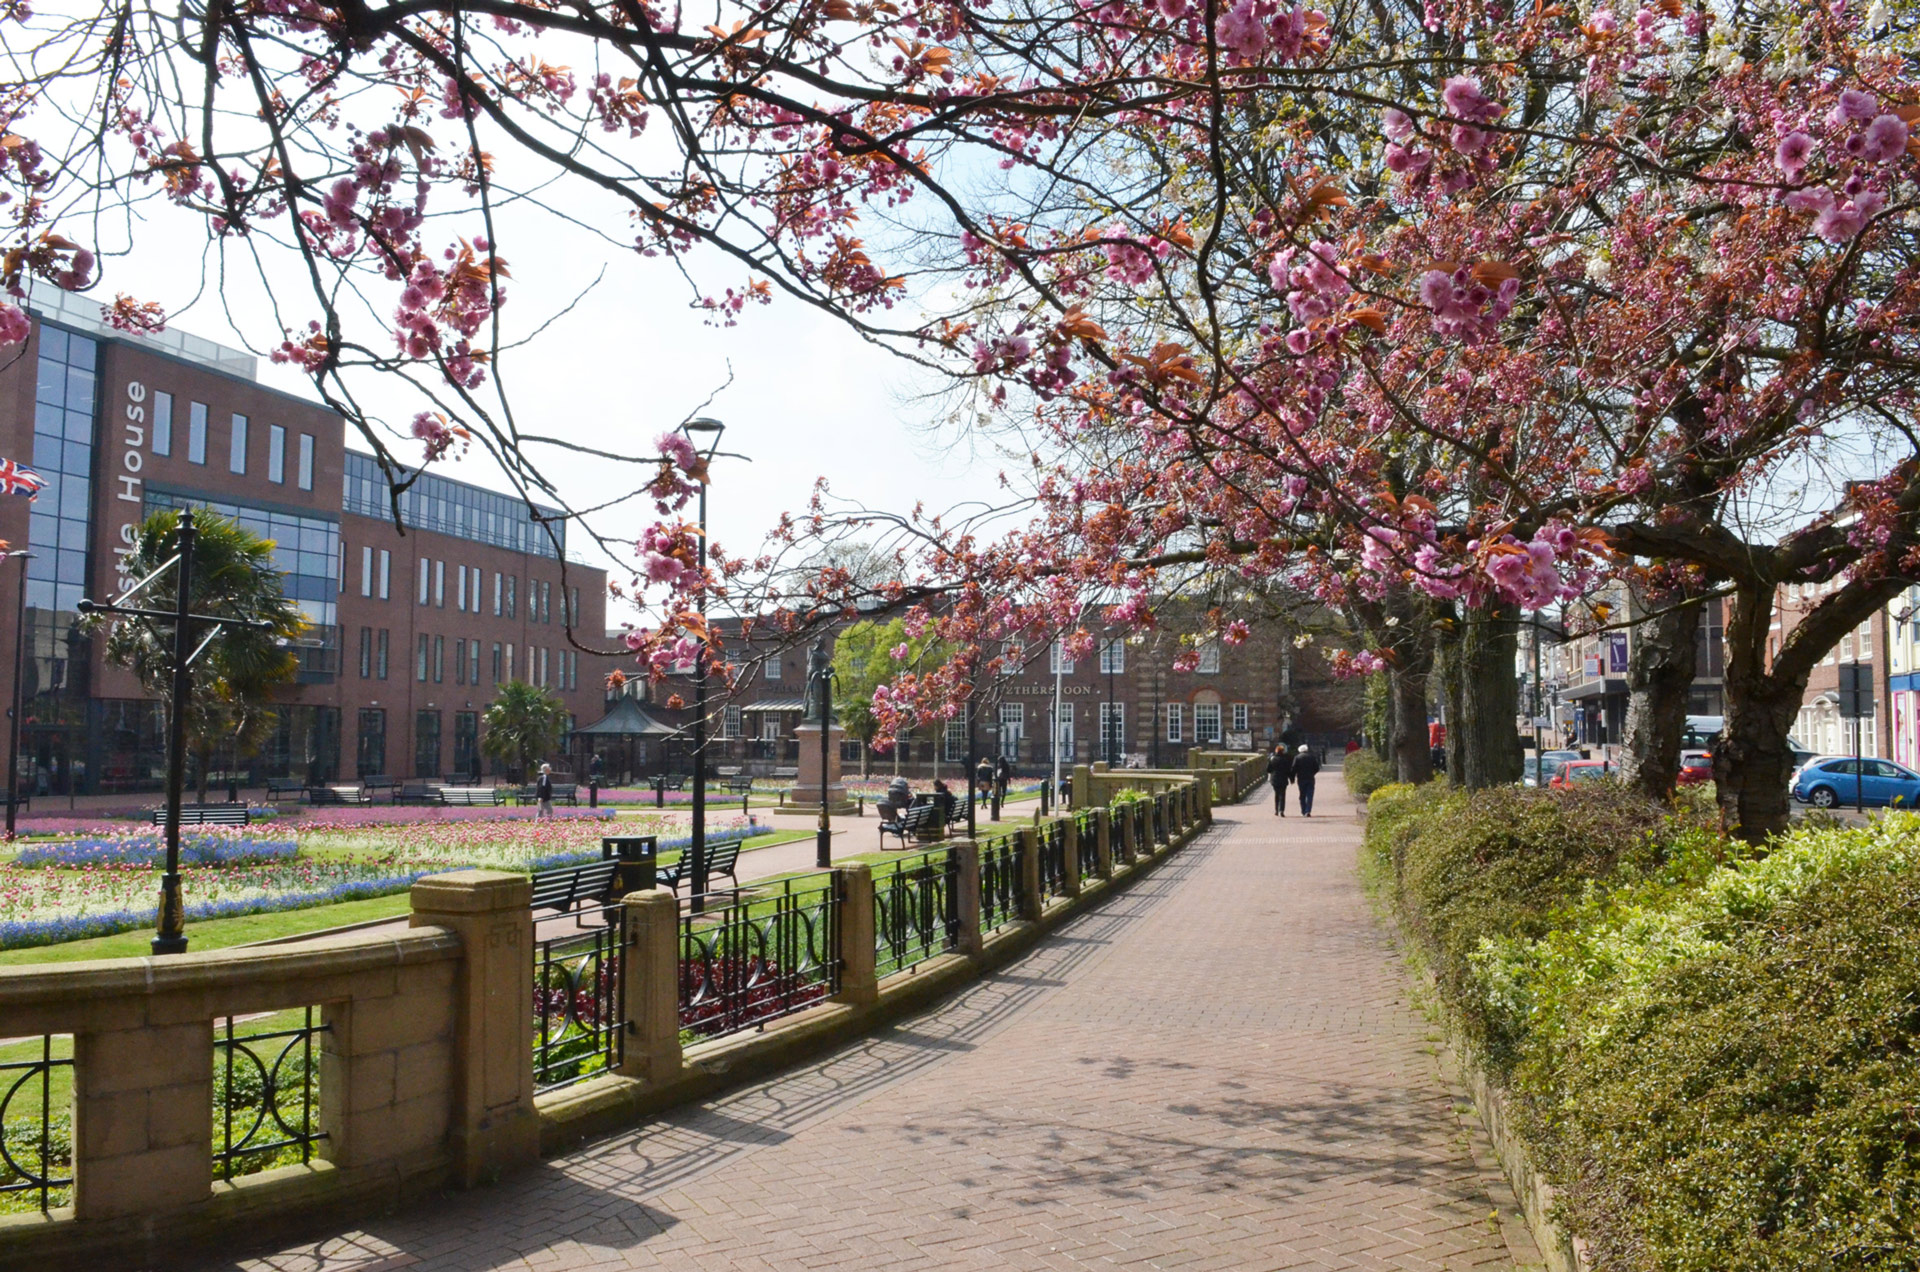 A photo of the blossom trees in the Queens Gardens outside of Castle House